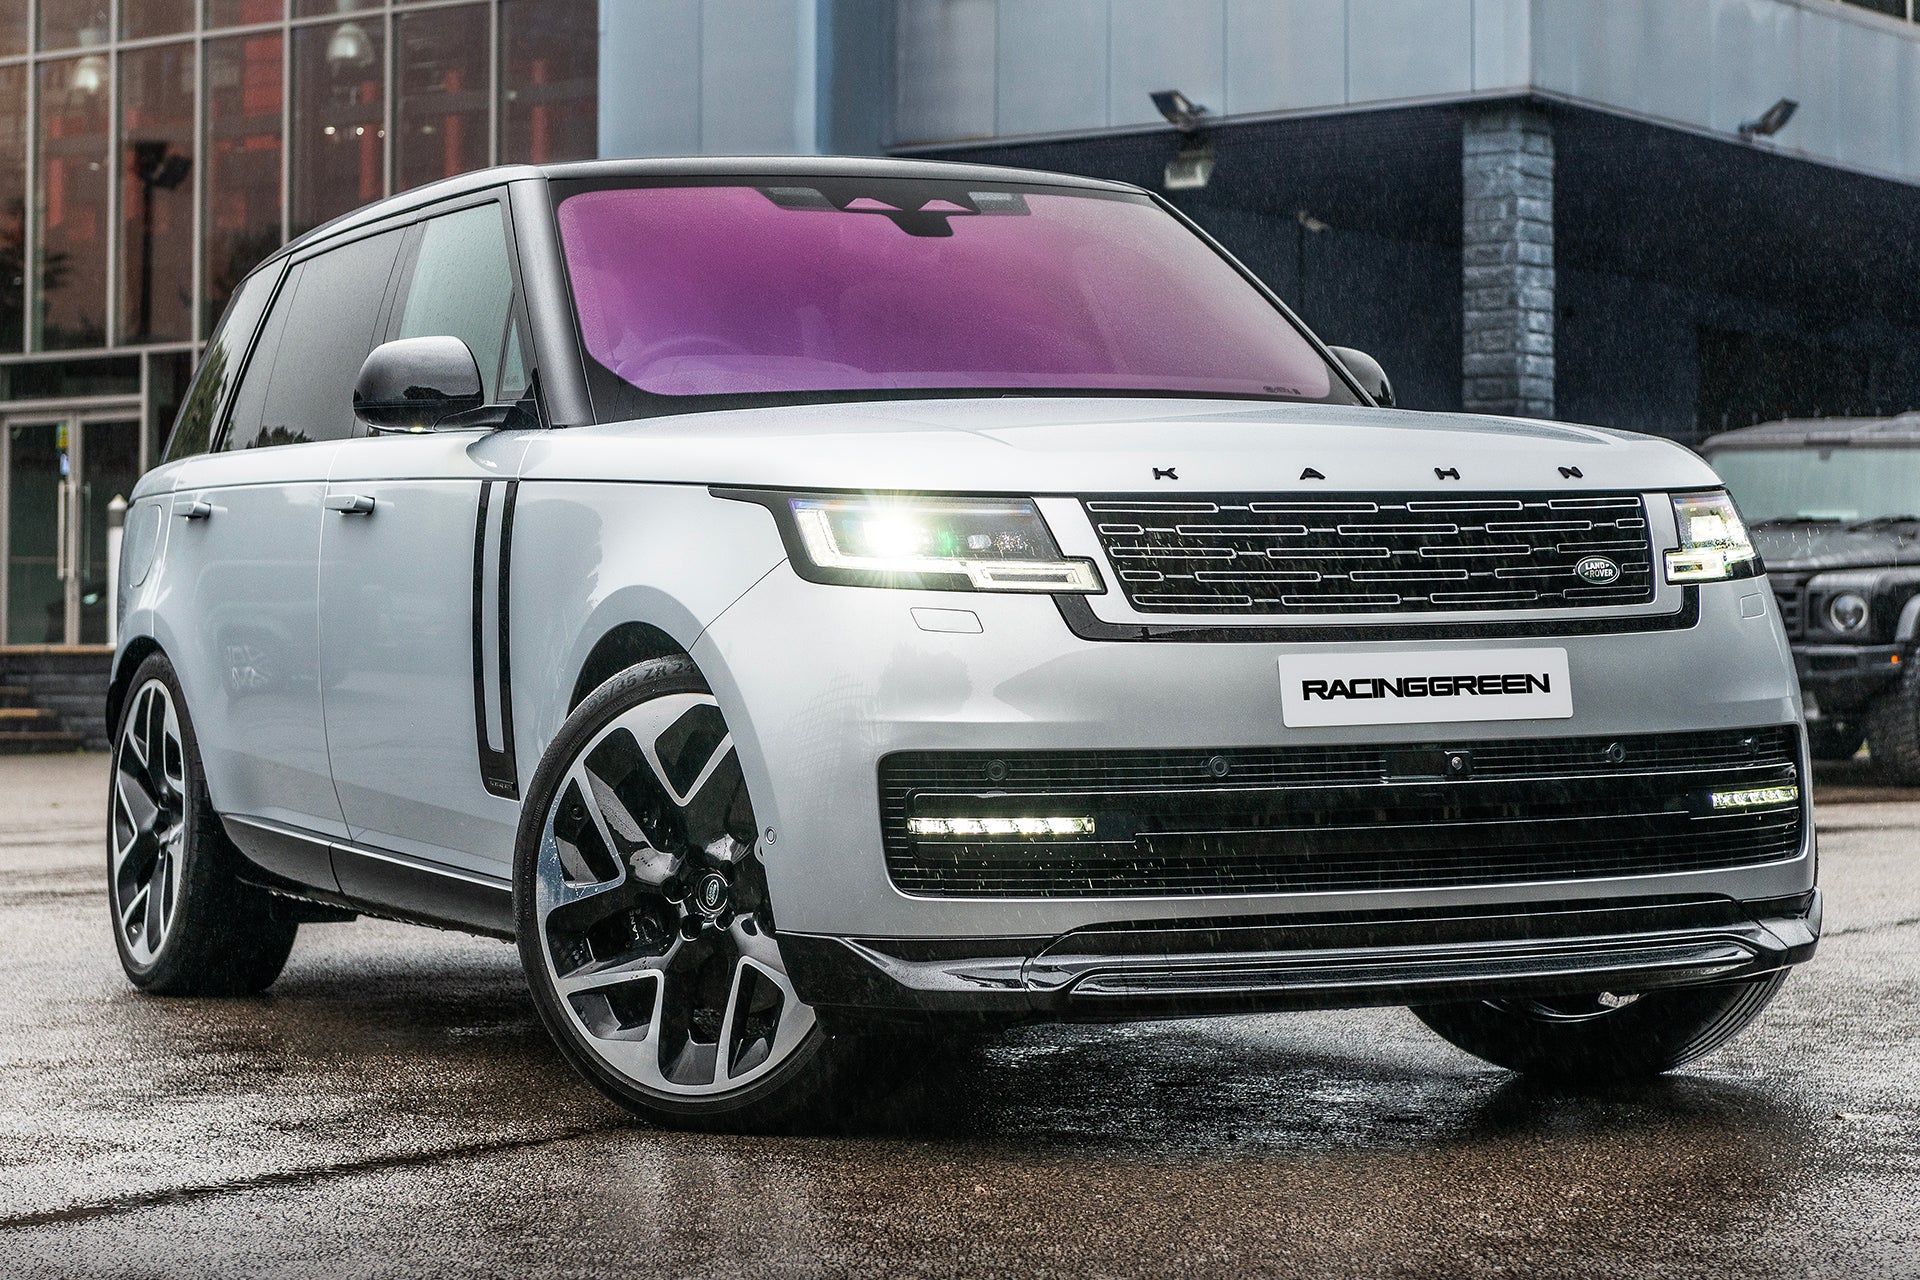 Tailor-made: Range Rover // RG - 01